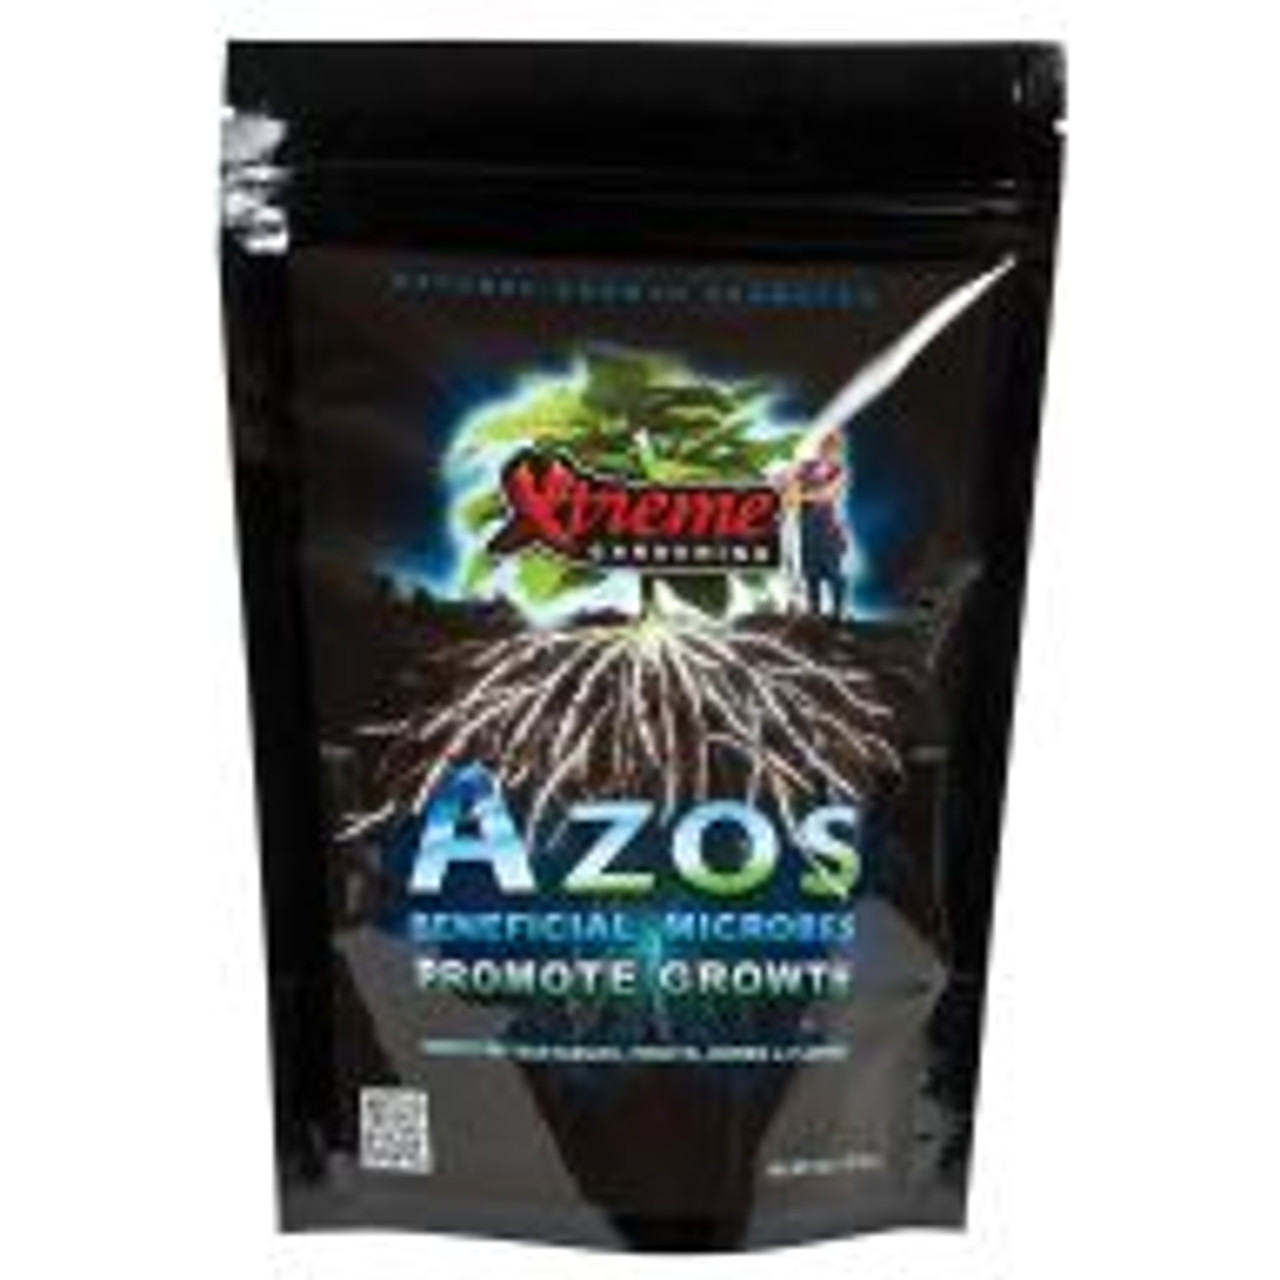 Azos is a beneficial microbe that fixes atmospheric nitrogen, converting it into a form thats available for plant consumption. Azos naturally promotes and sustains plant nutrition, and also does a great job as a rooting solution for new cuttings.